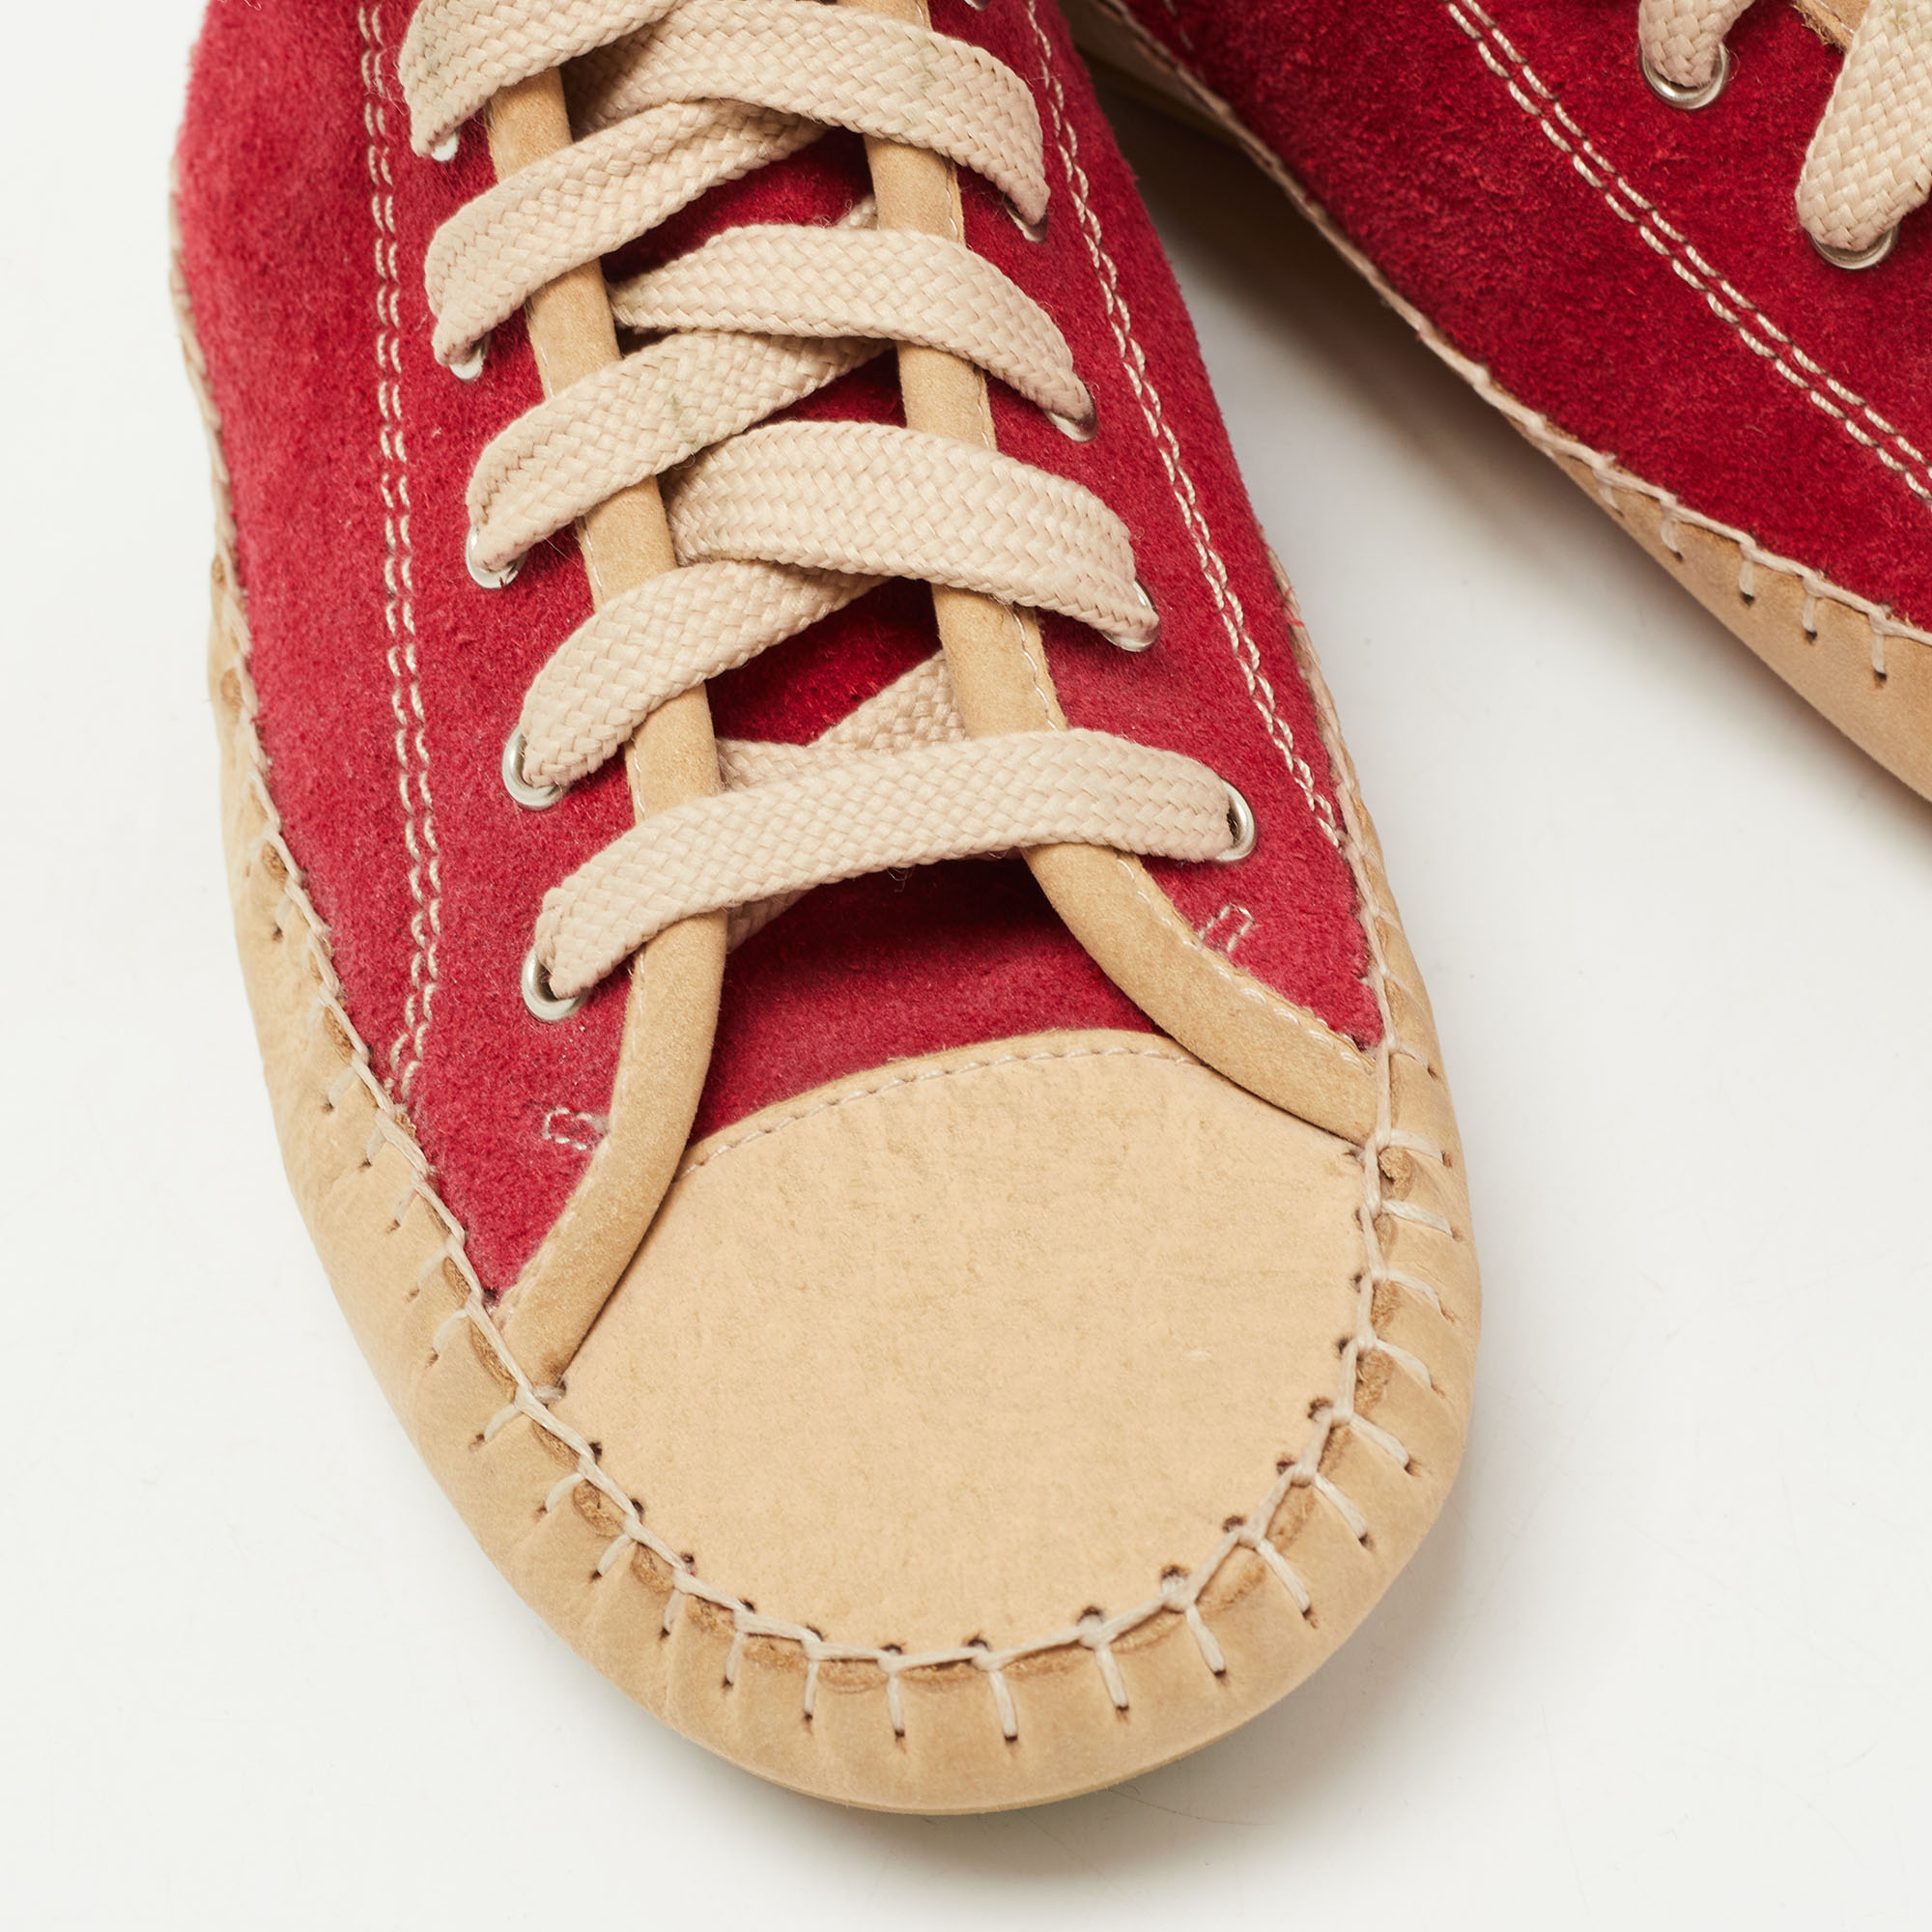 See By Chloé Red Suede High Top Sneakers Size 35